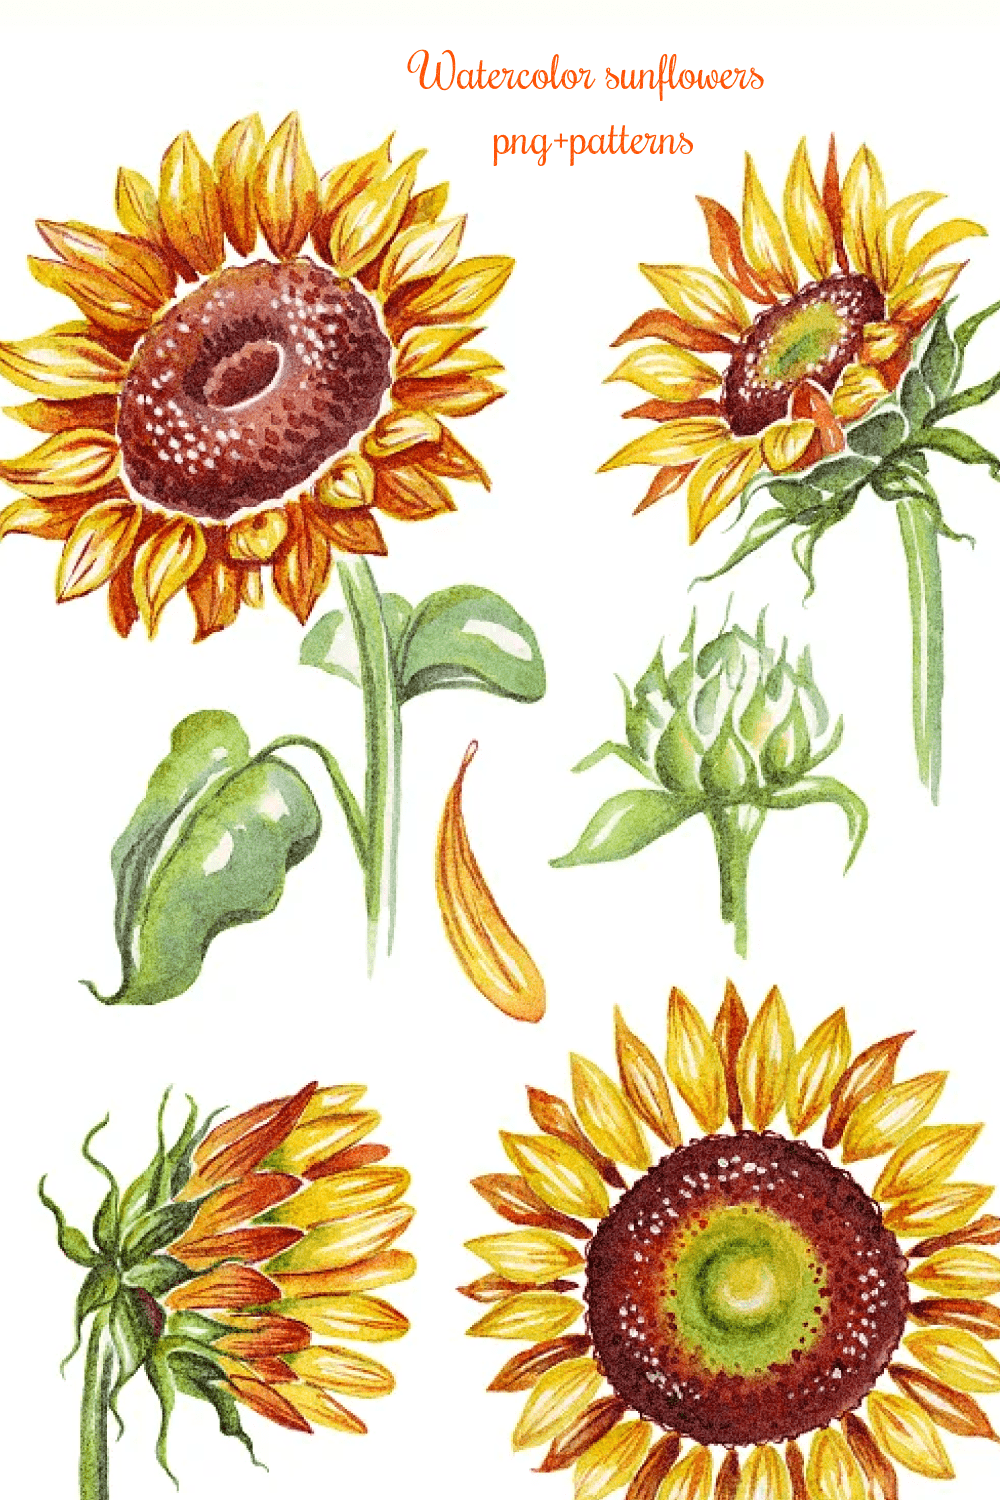 Watercolor sunflowers png+patterns - pinterest image preview.